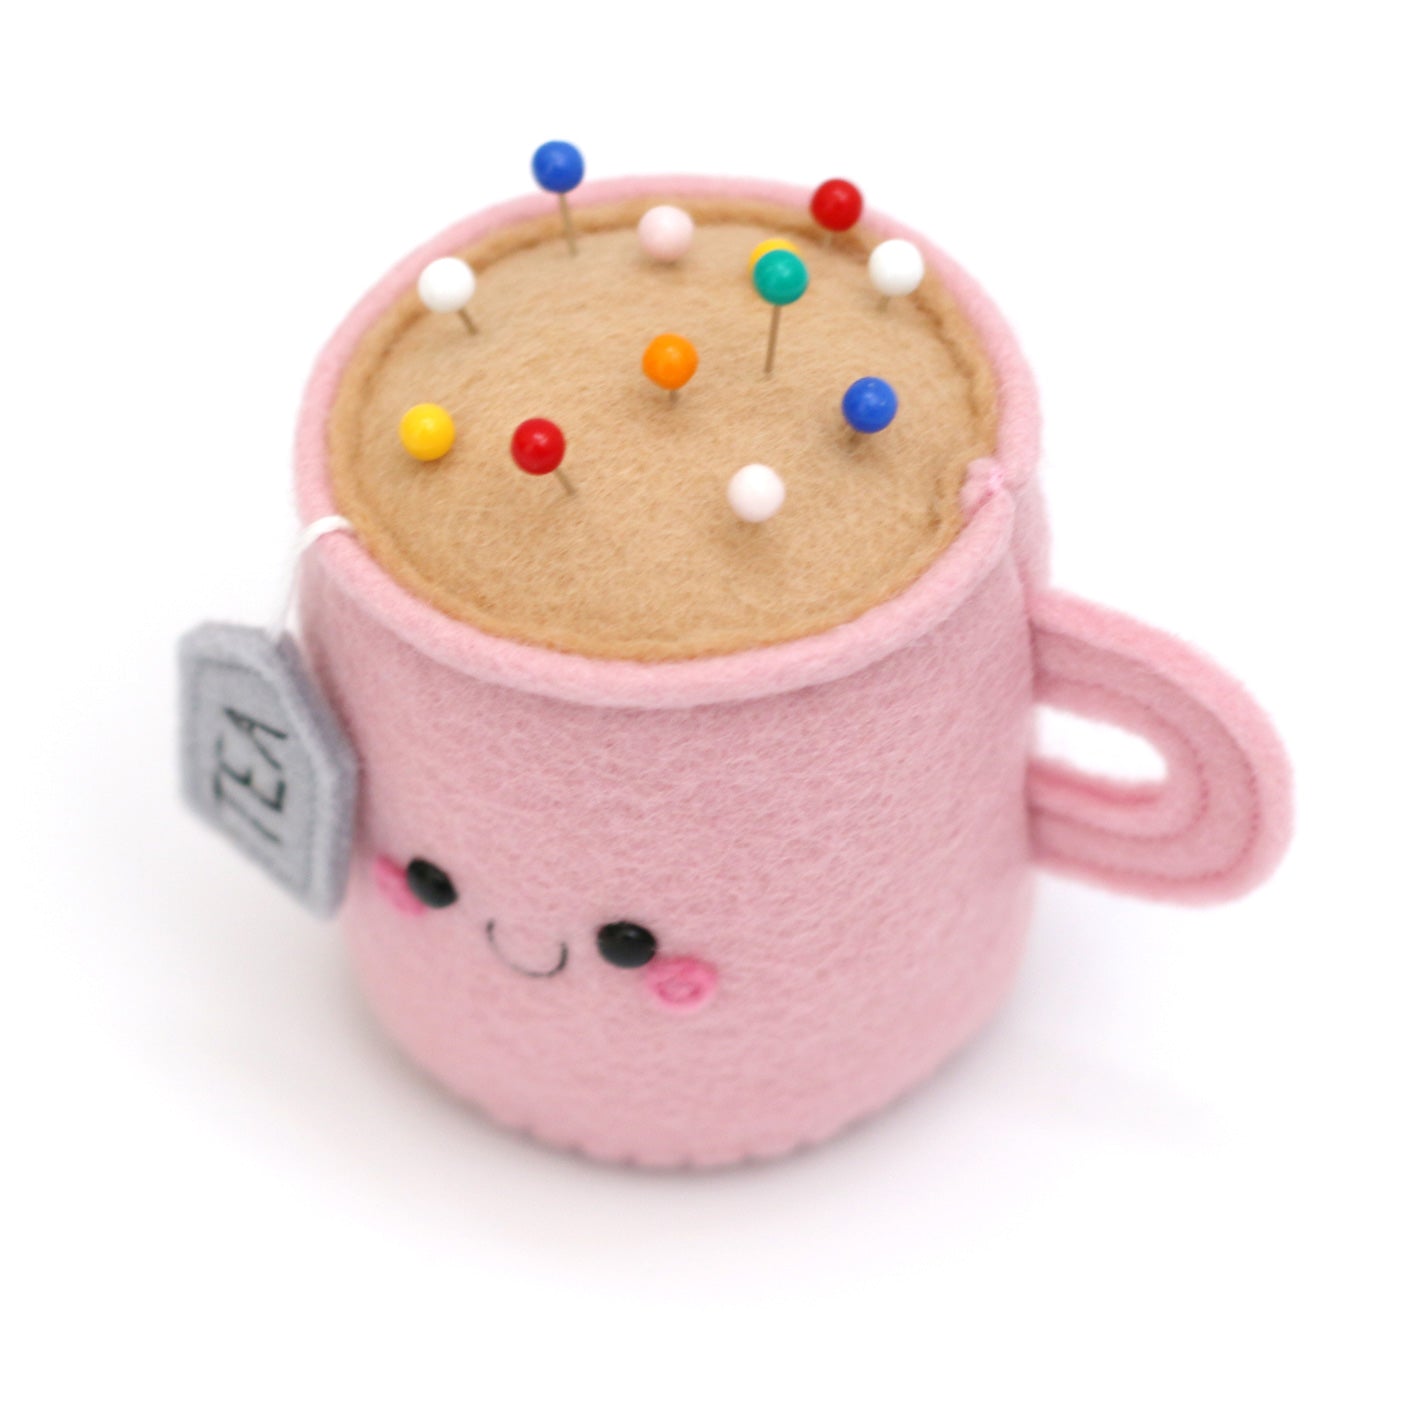 Pink Teacup Pincushion with happy face and sewing pins